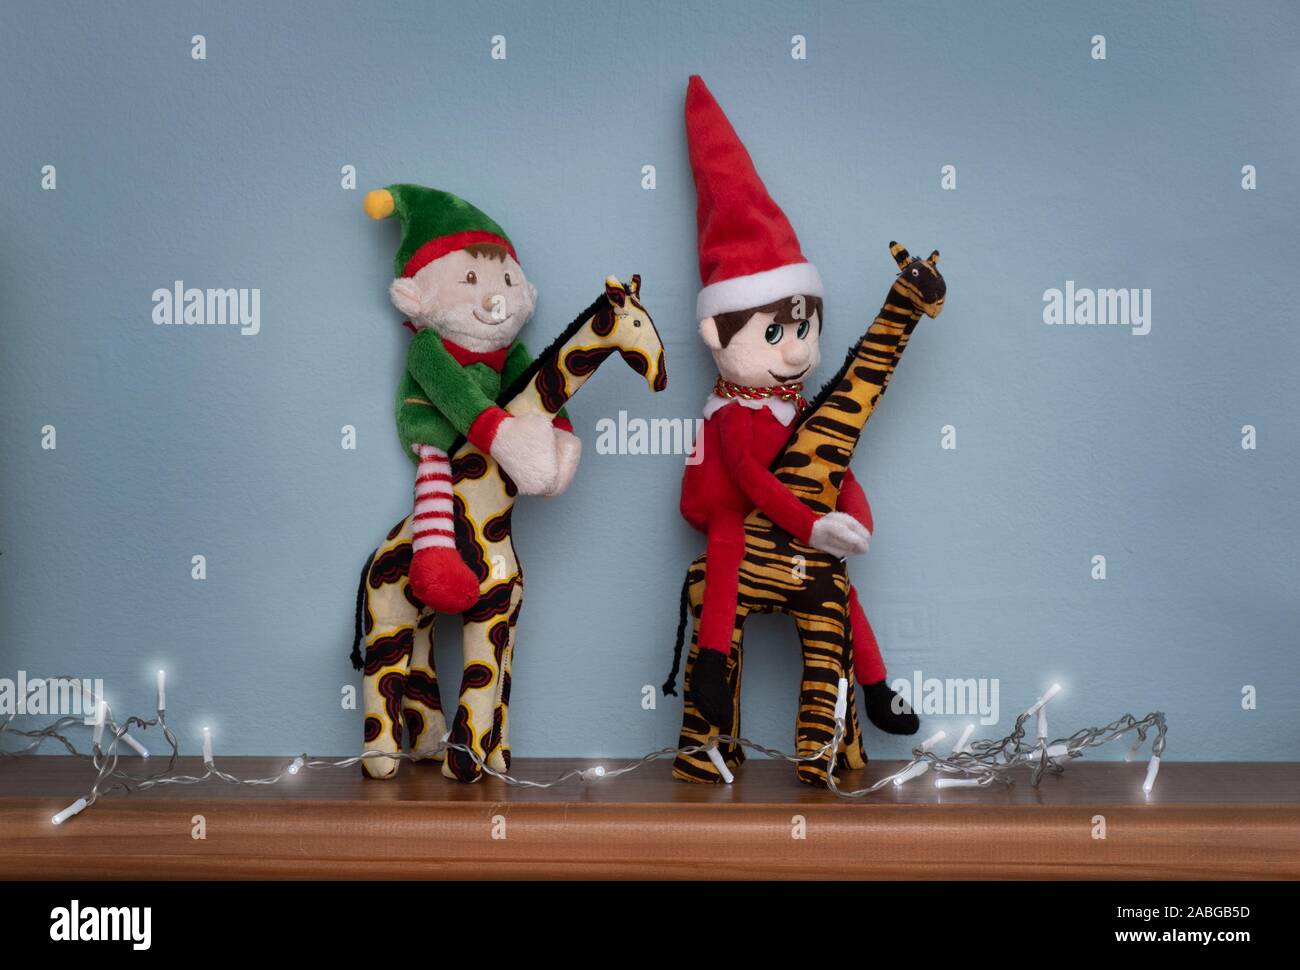 Elf on safari, riding a giraffe, two elves playing the fool. Cute tradition of sending Santa's elf to check up on children just before christmas. Stock Photo